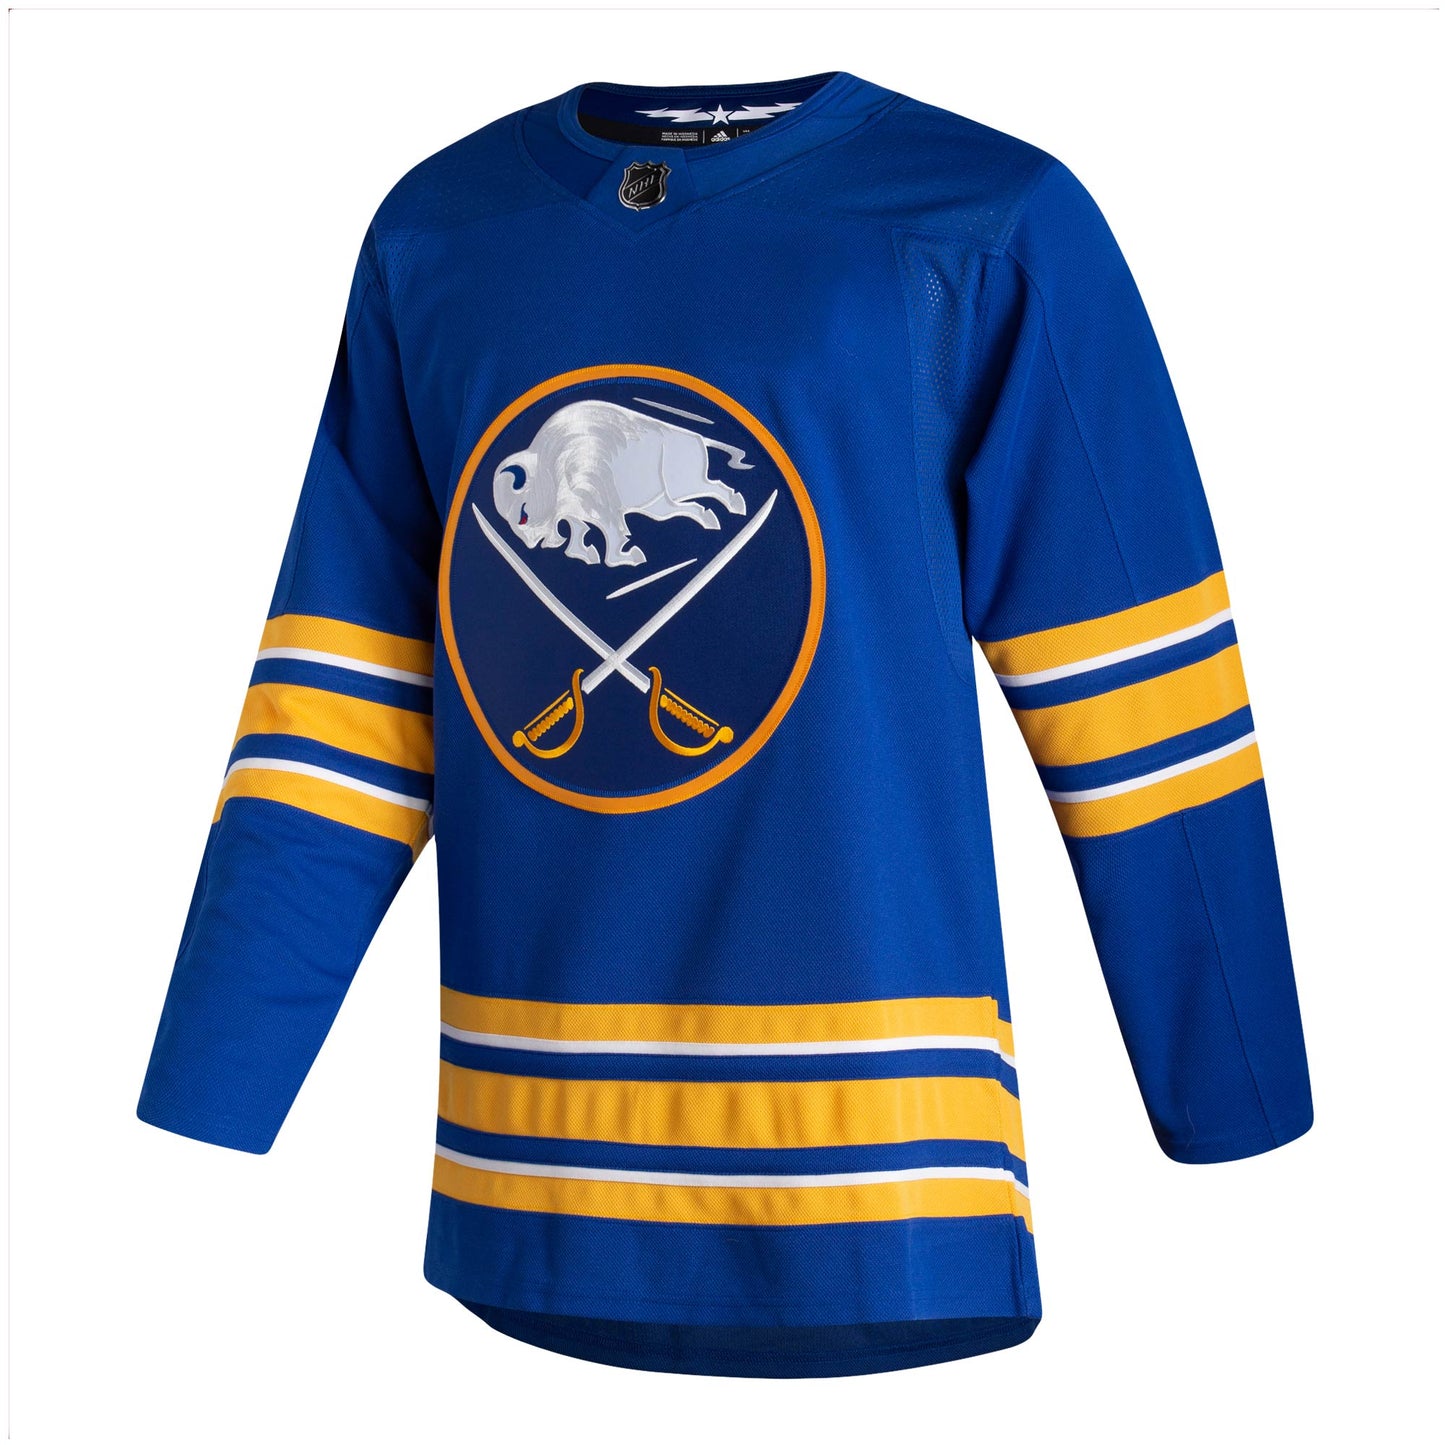 Buffalo Sabres adidas 2020/21 Home Authentic Jersey - Royal